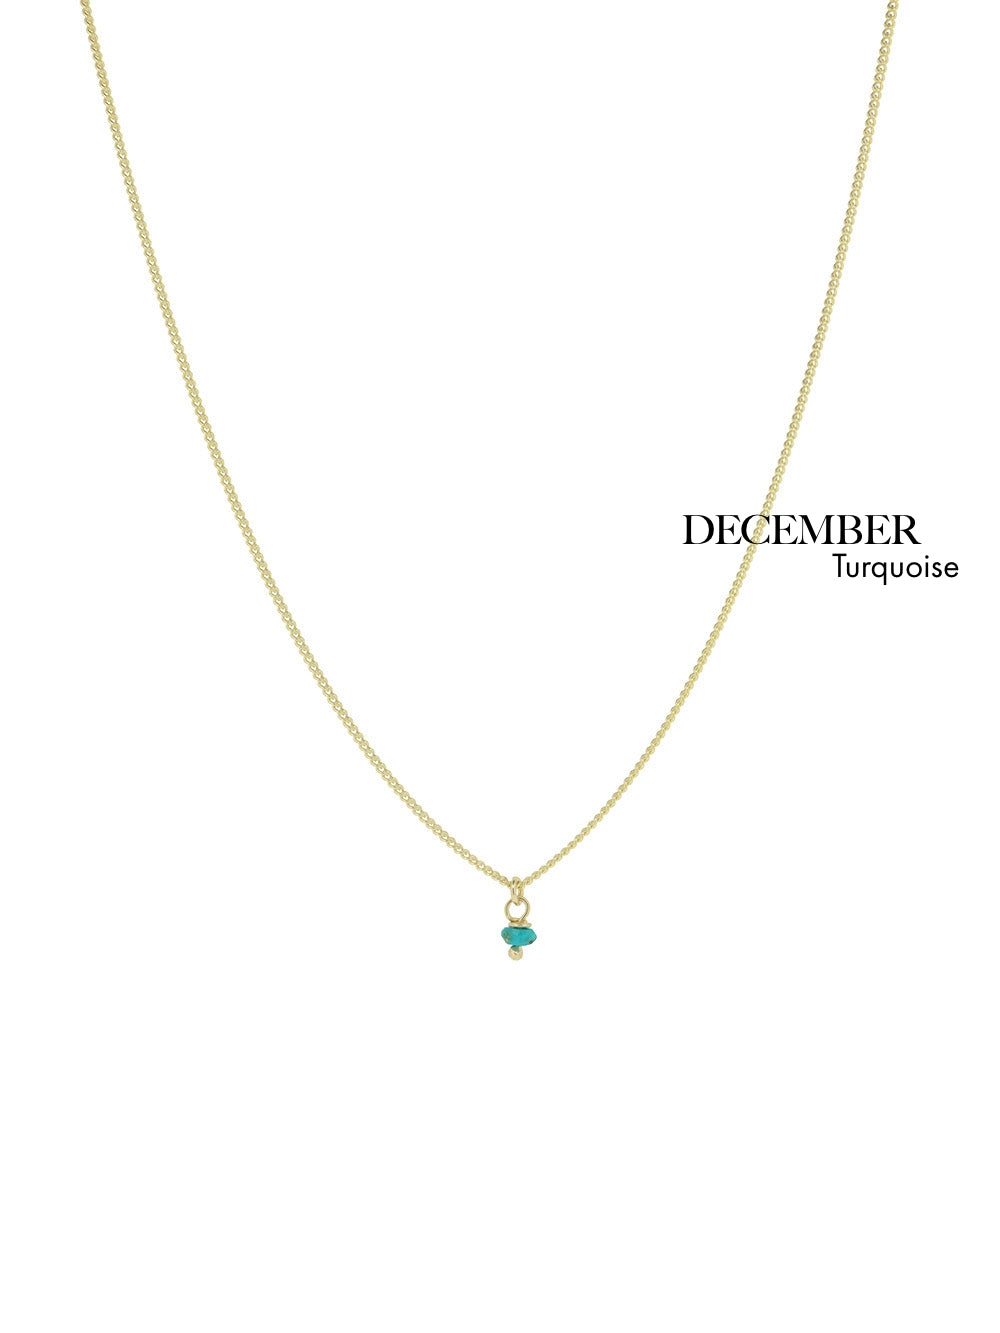 Birthstone December - Turquoise | 14K Gold Plated